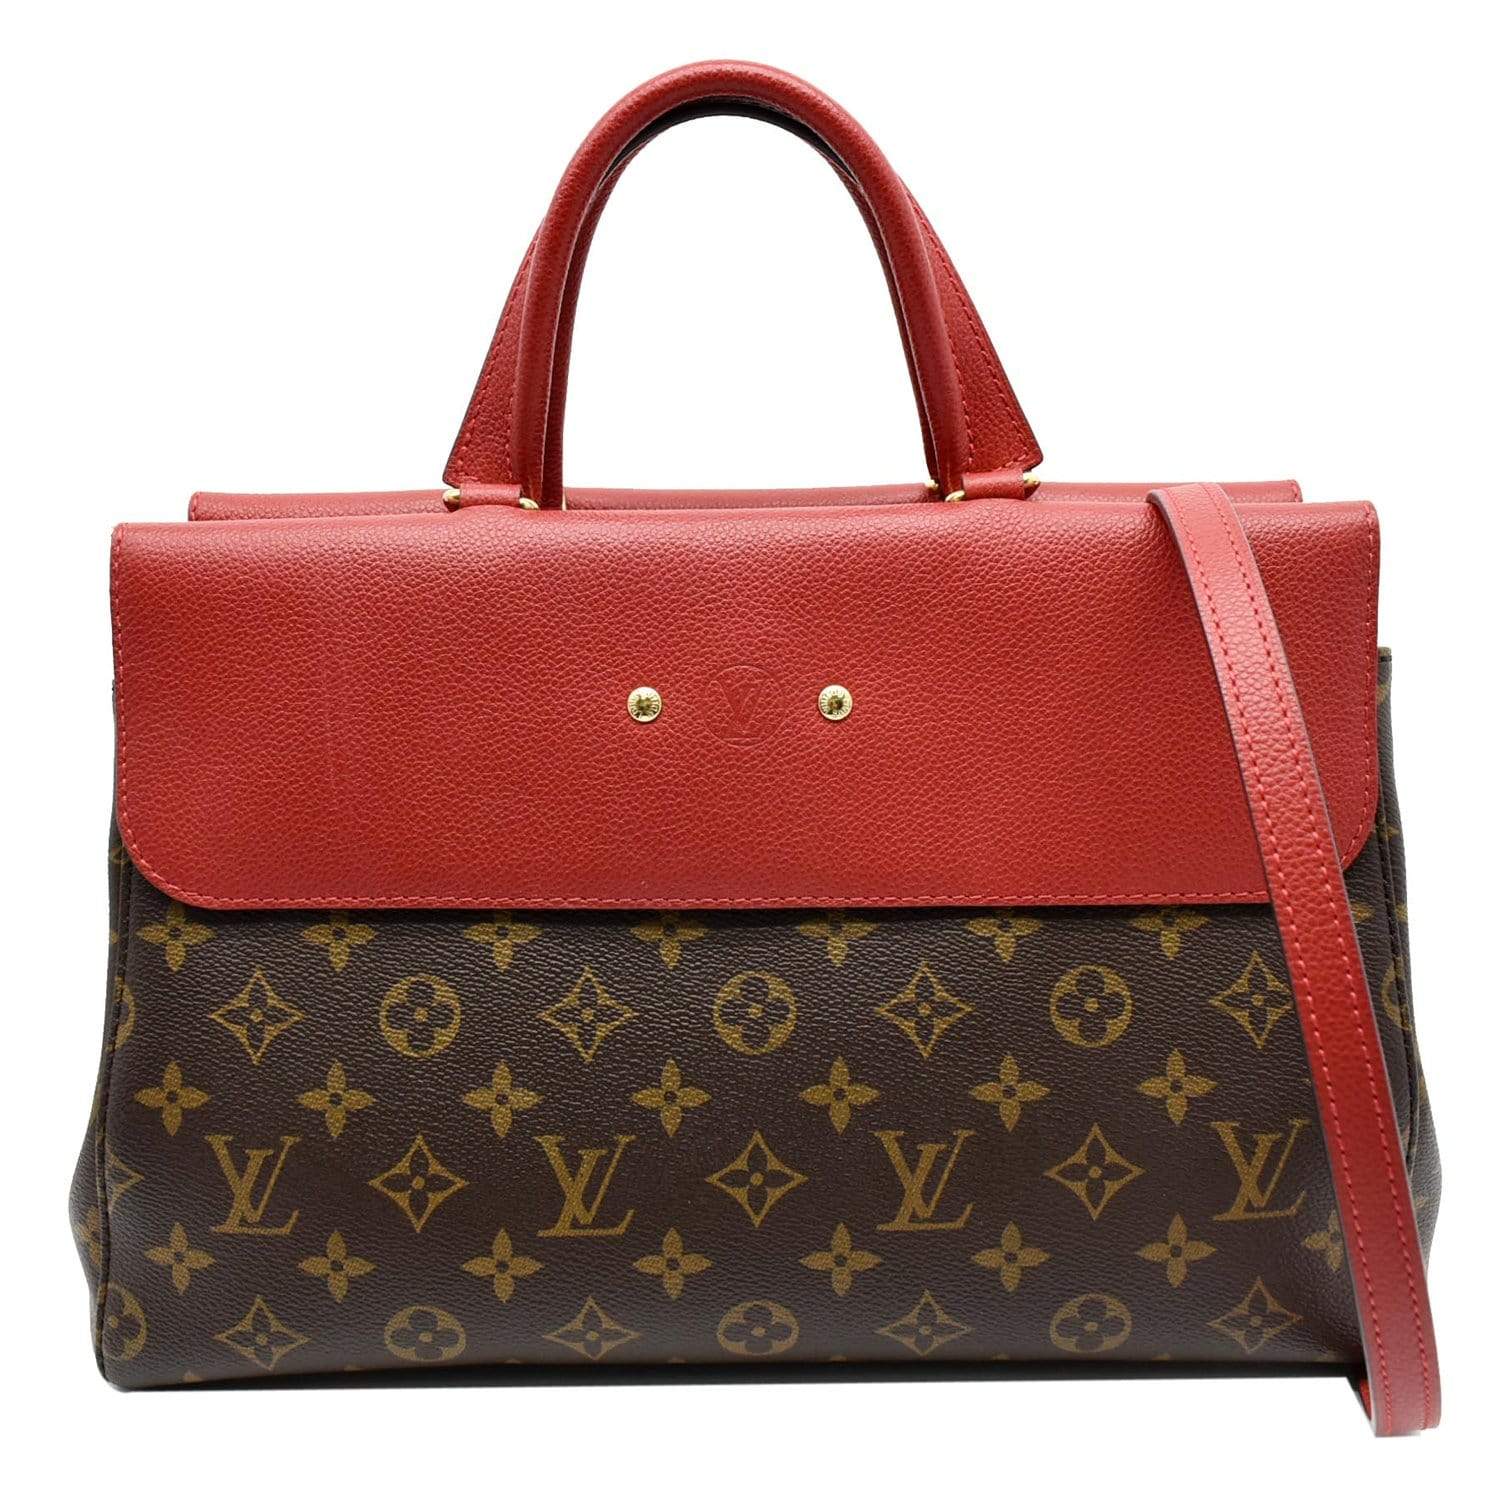 Louis Vuitton Brown/Red Leather and Monogram Canvas Double V Bag